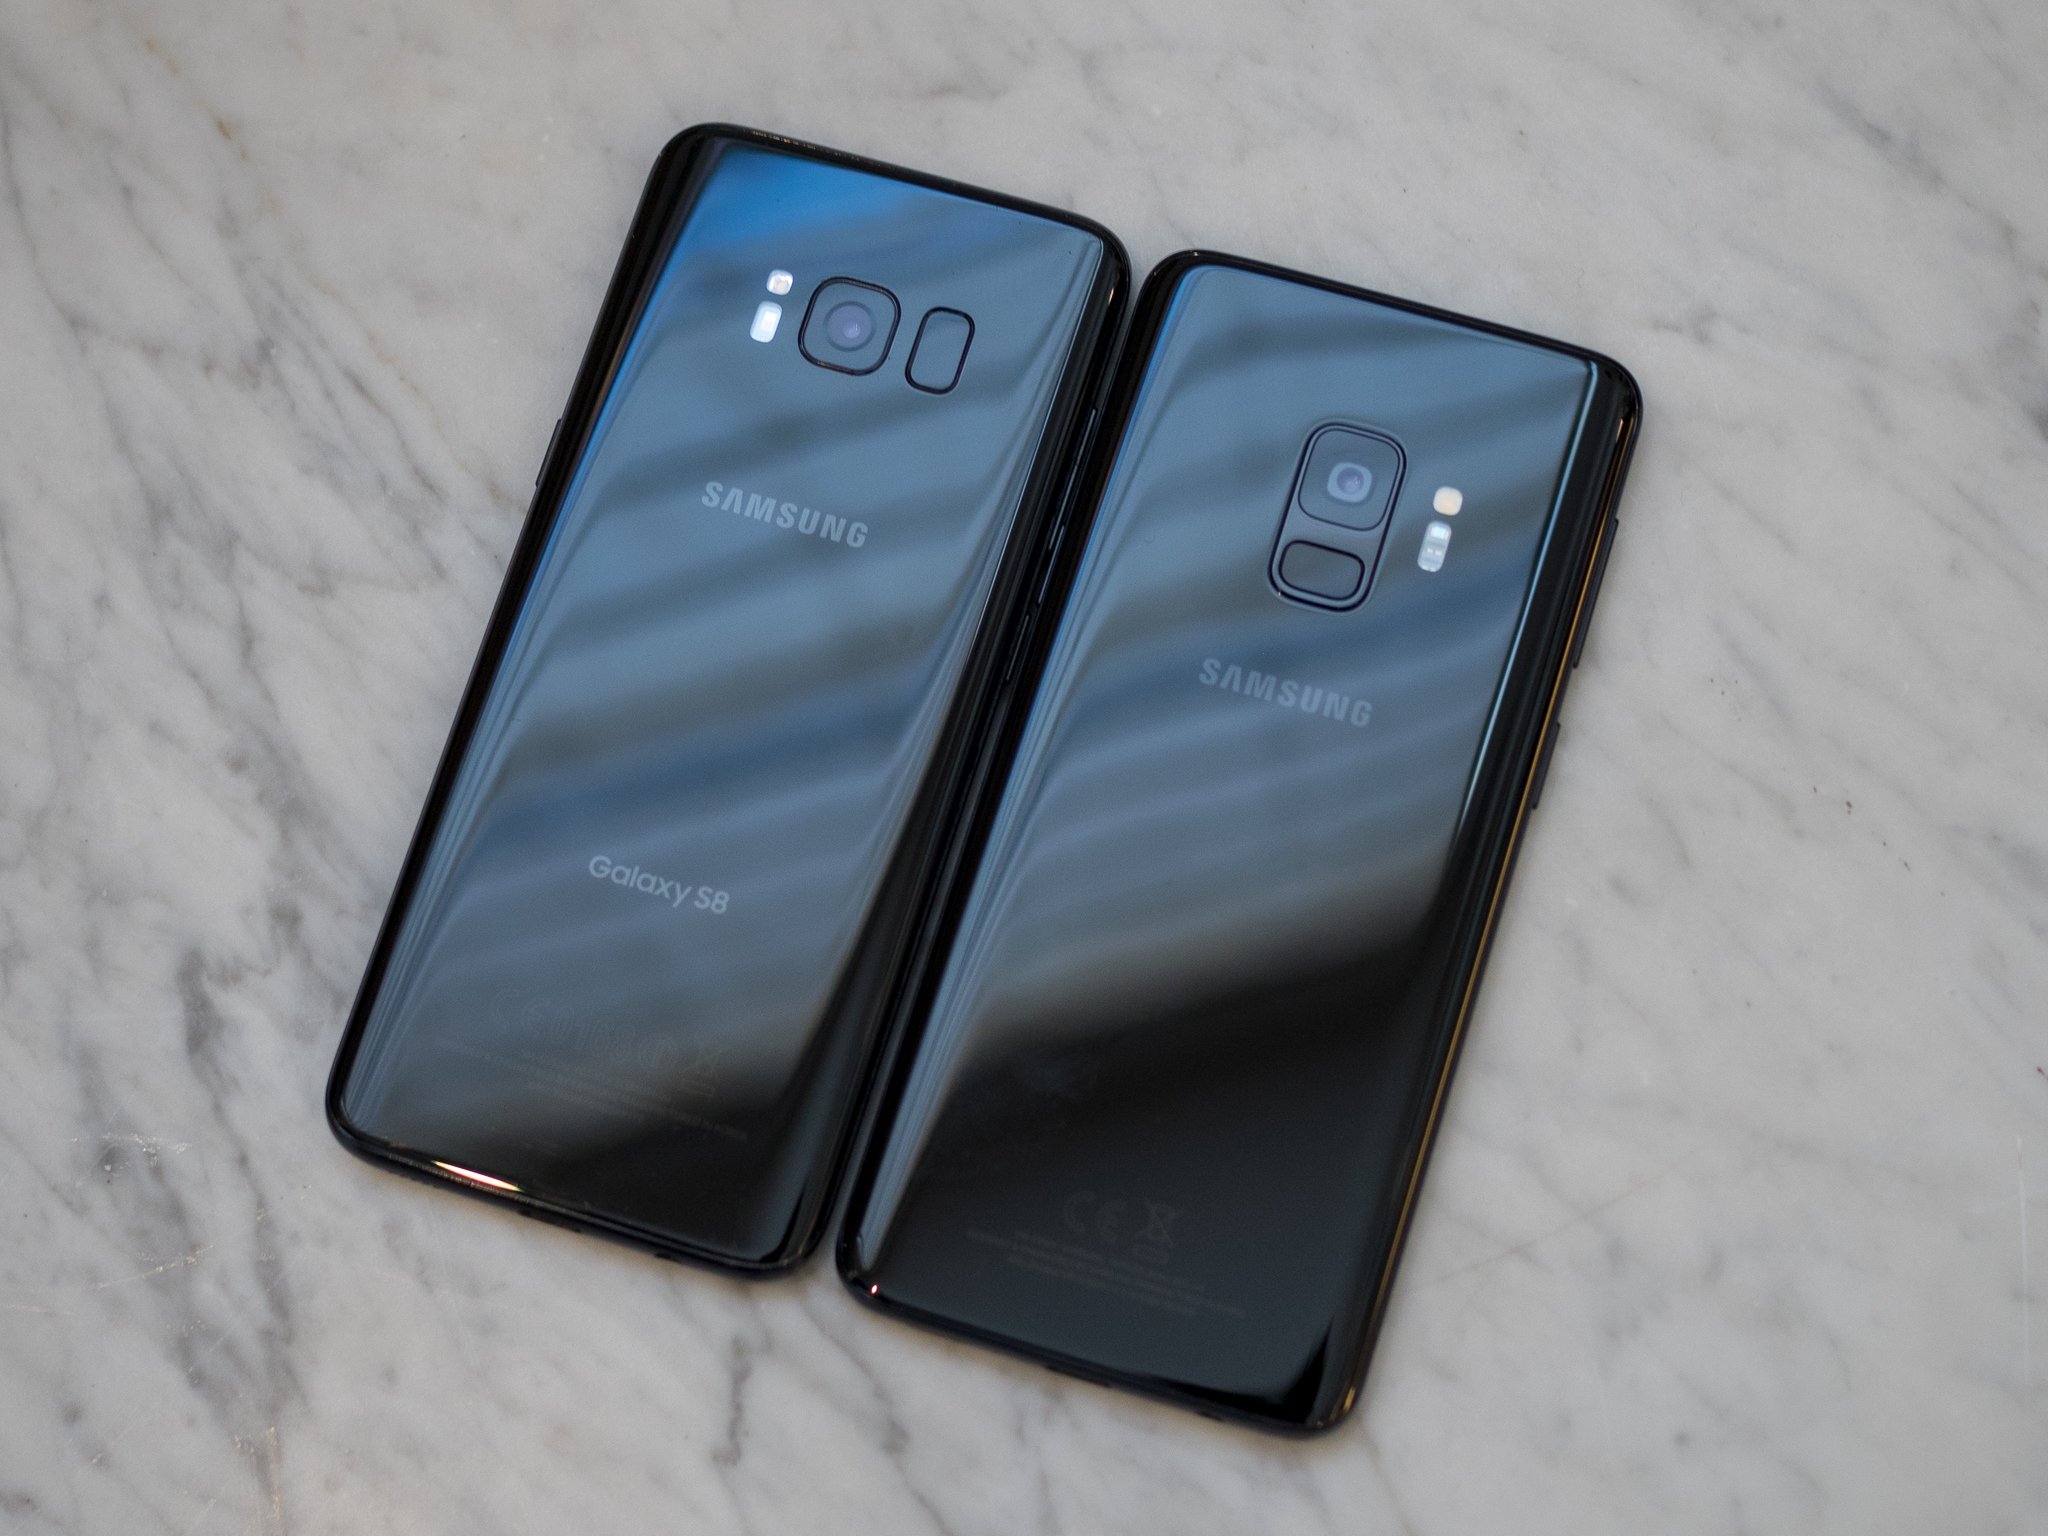 Samsung Galaxy S9 Vs Galaxy S8 Should You Upgrade Android Central